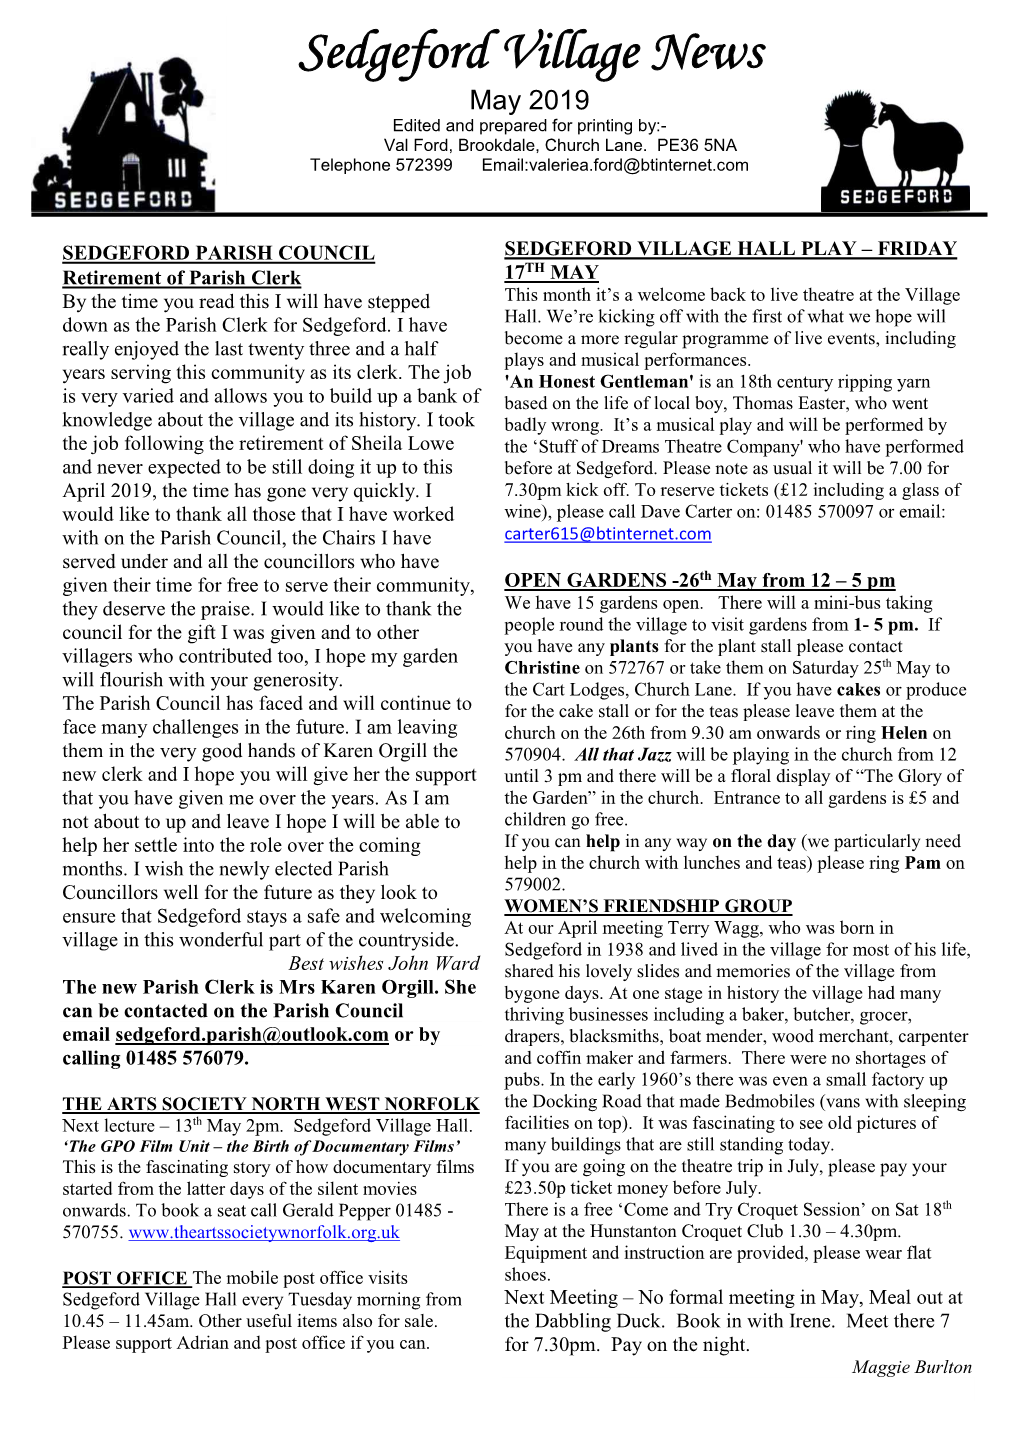 Sedgeford Village News May 2019 Edited and Prepared for Printing By:- Val Ford, Brookdale, Church Lane